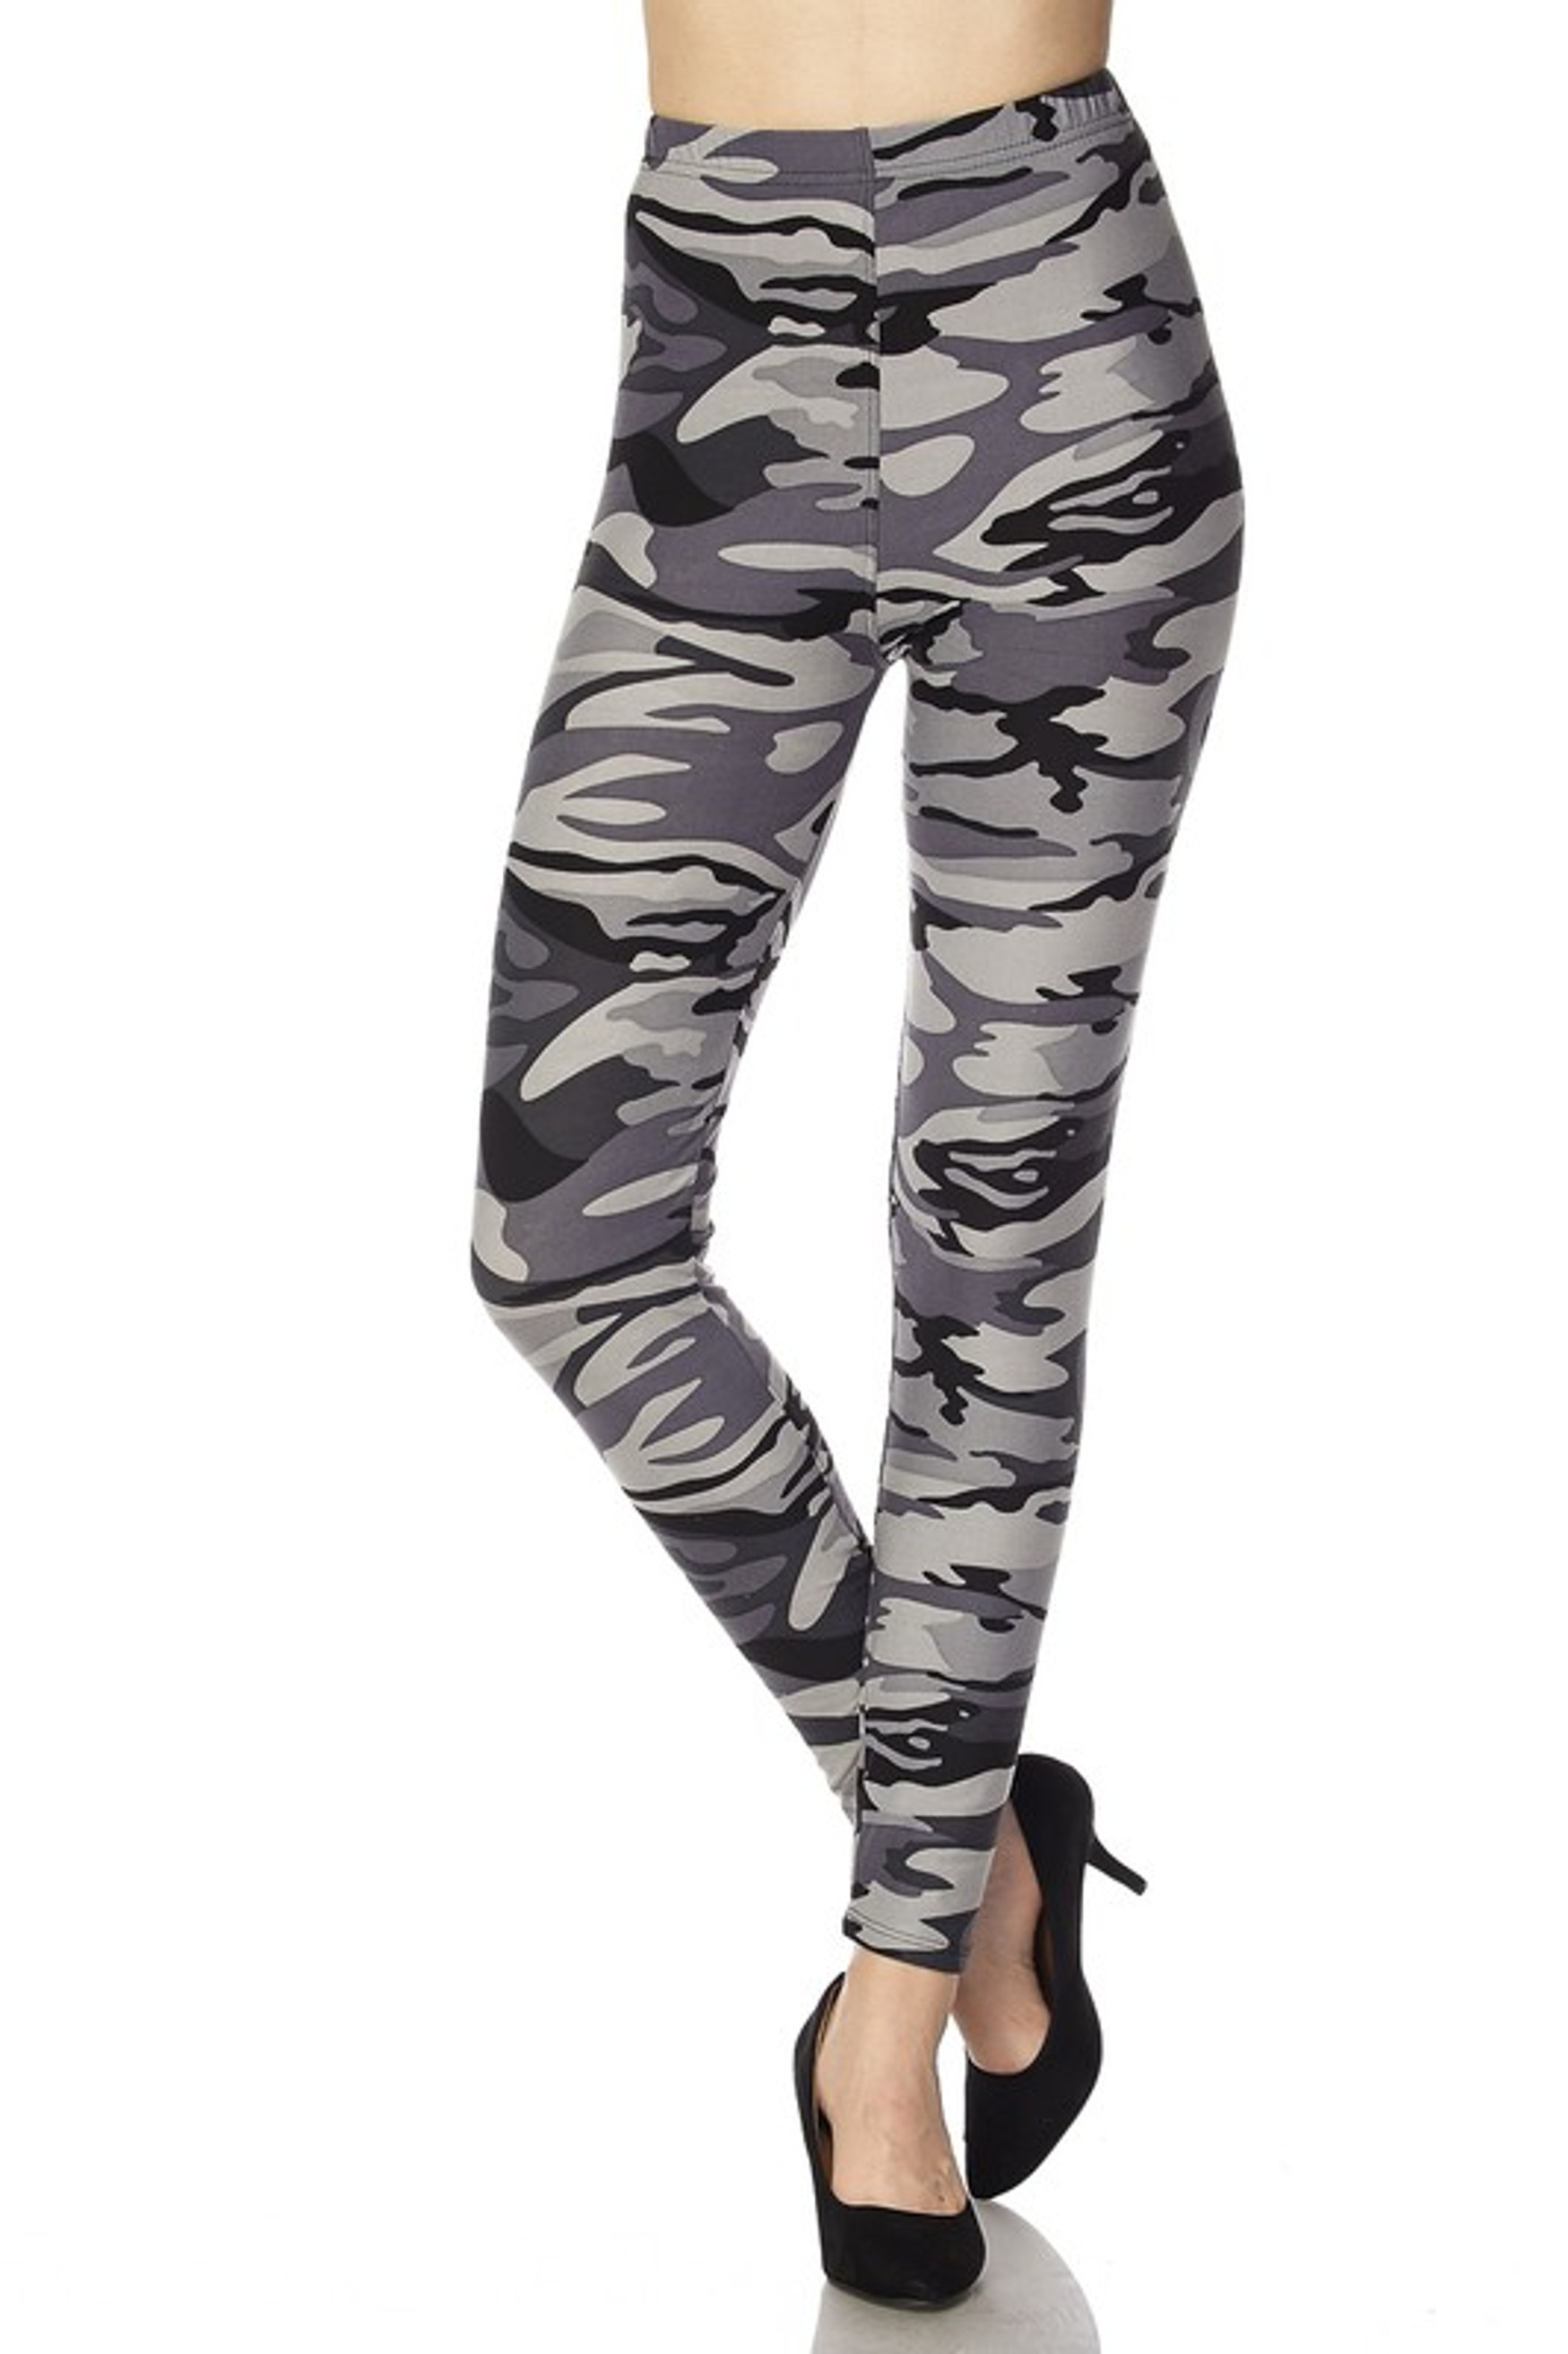 Shades of Gray Camouflage Leggings